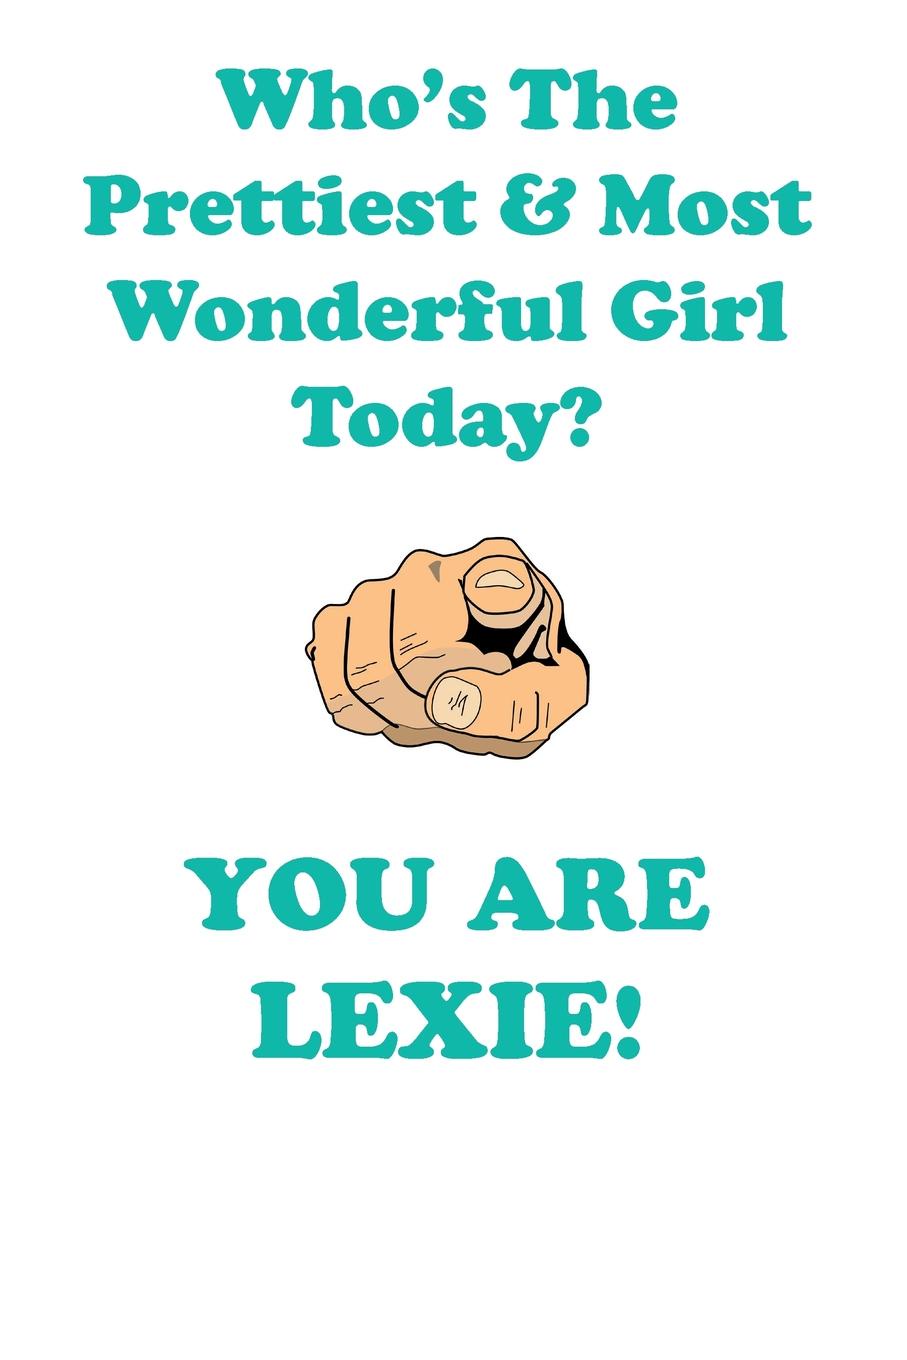 LEXIE is The Prettiest Affirmations Workbook Positive Affirmations Workbook Includes. Mentoring Questions, Guidance, Supporting You